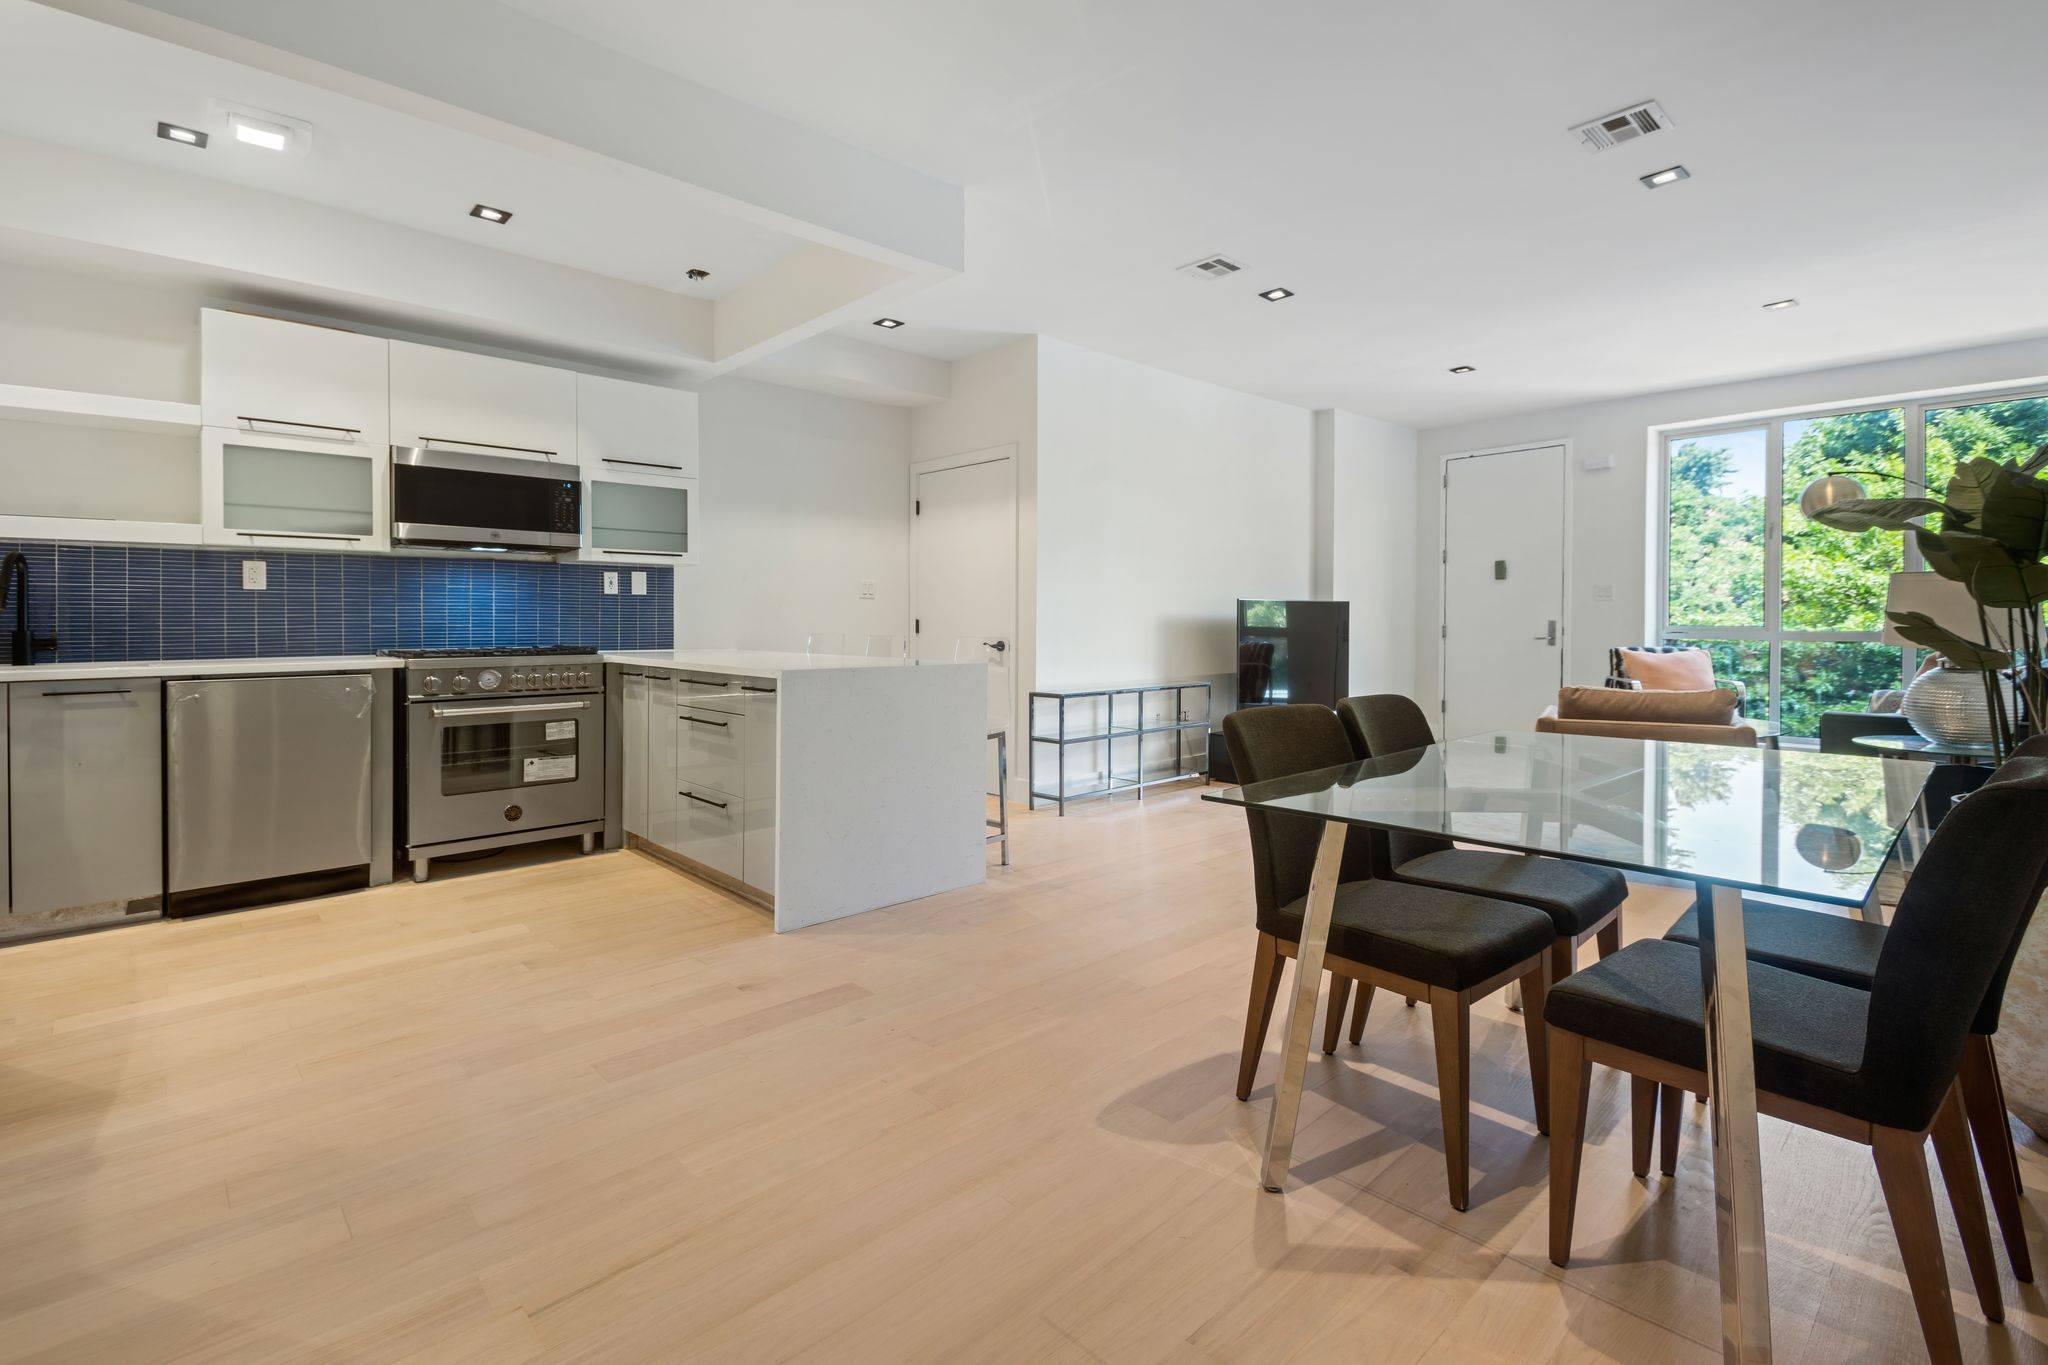 This modern duplex condo is the ideal oasis from the big city.